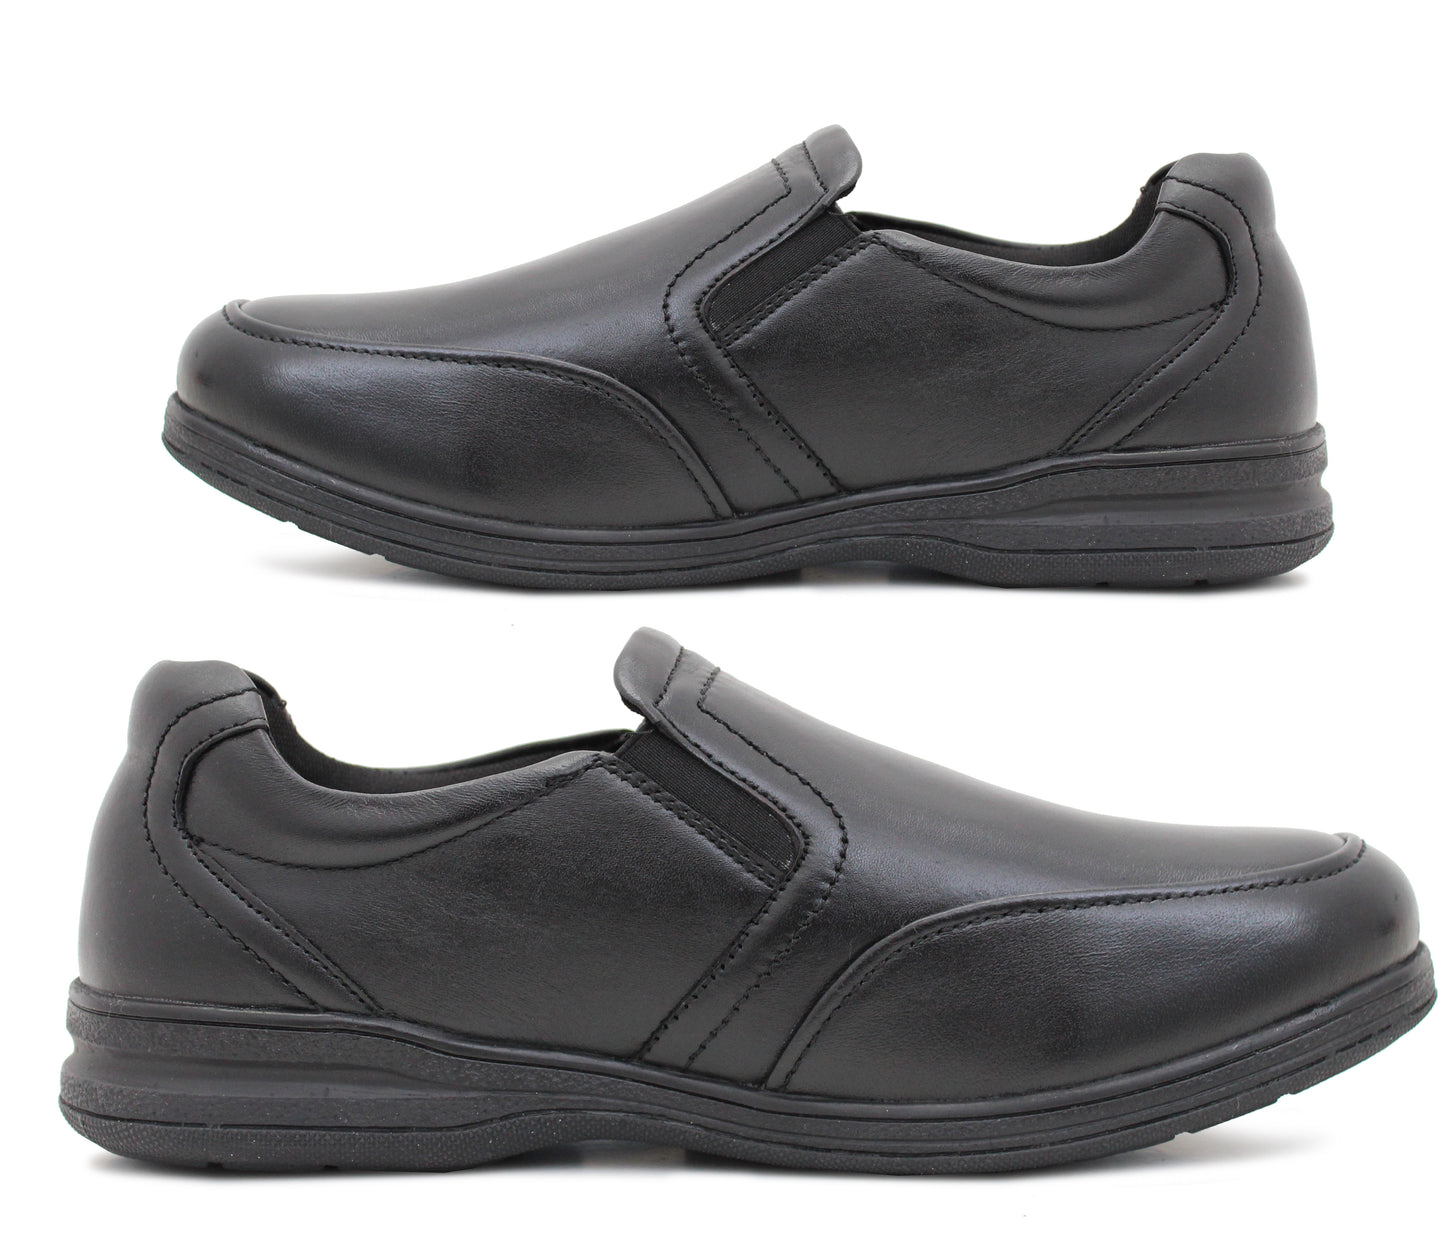 Mens Genuine Leather Slip On Loafers Smart Casual Flat Gents Driving Comfort Shoes